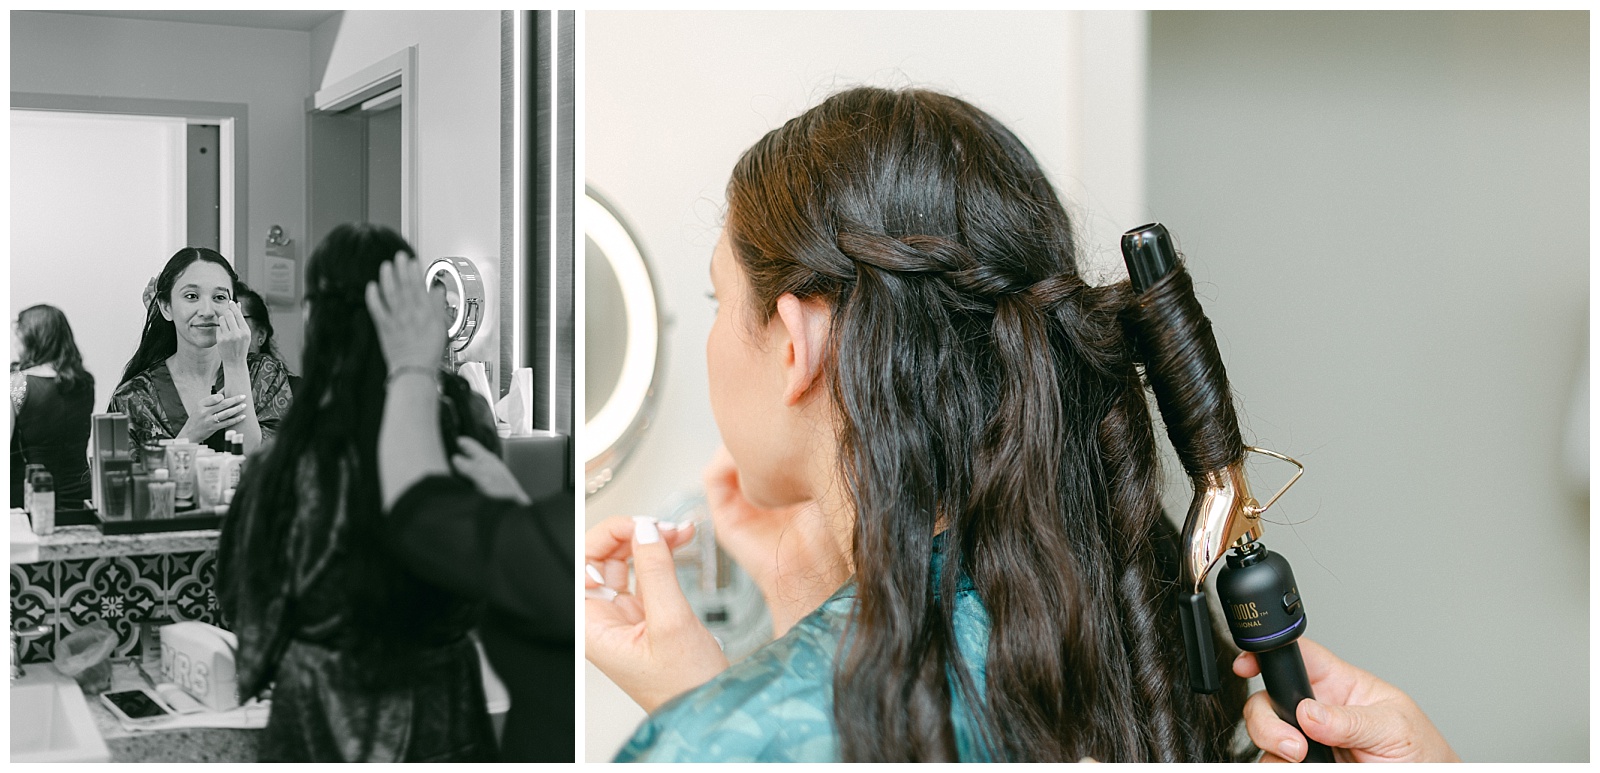 Left: Black and white getting ready photo of bride doing her makeup before getting into her wedding dress.
Right: Bride's hair being done by her family member. 
By Elizabeth Kane Photography at Disney's Riviera Resort in Orlando Florida